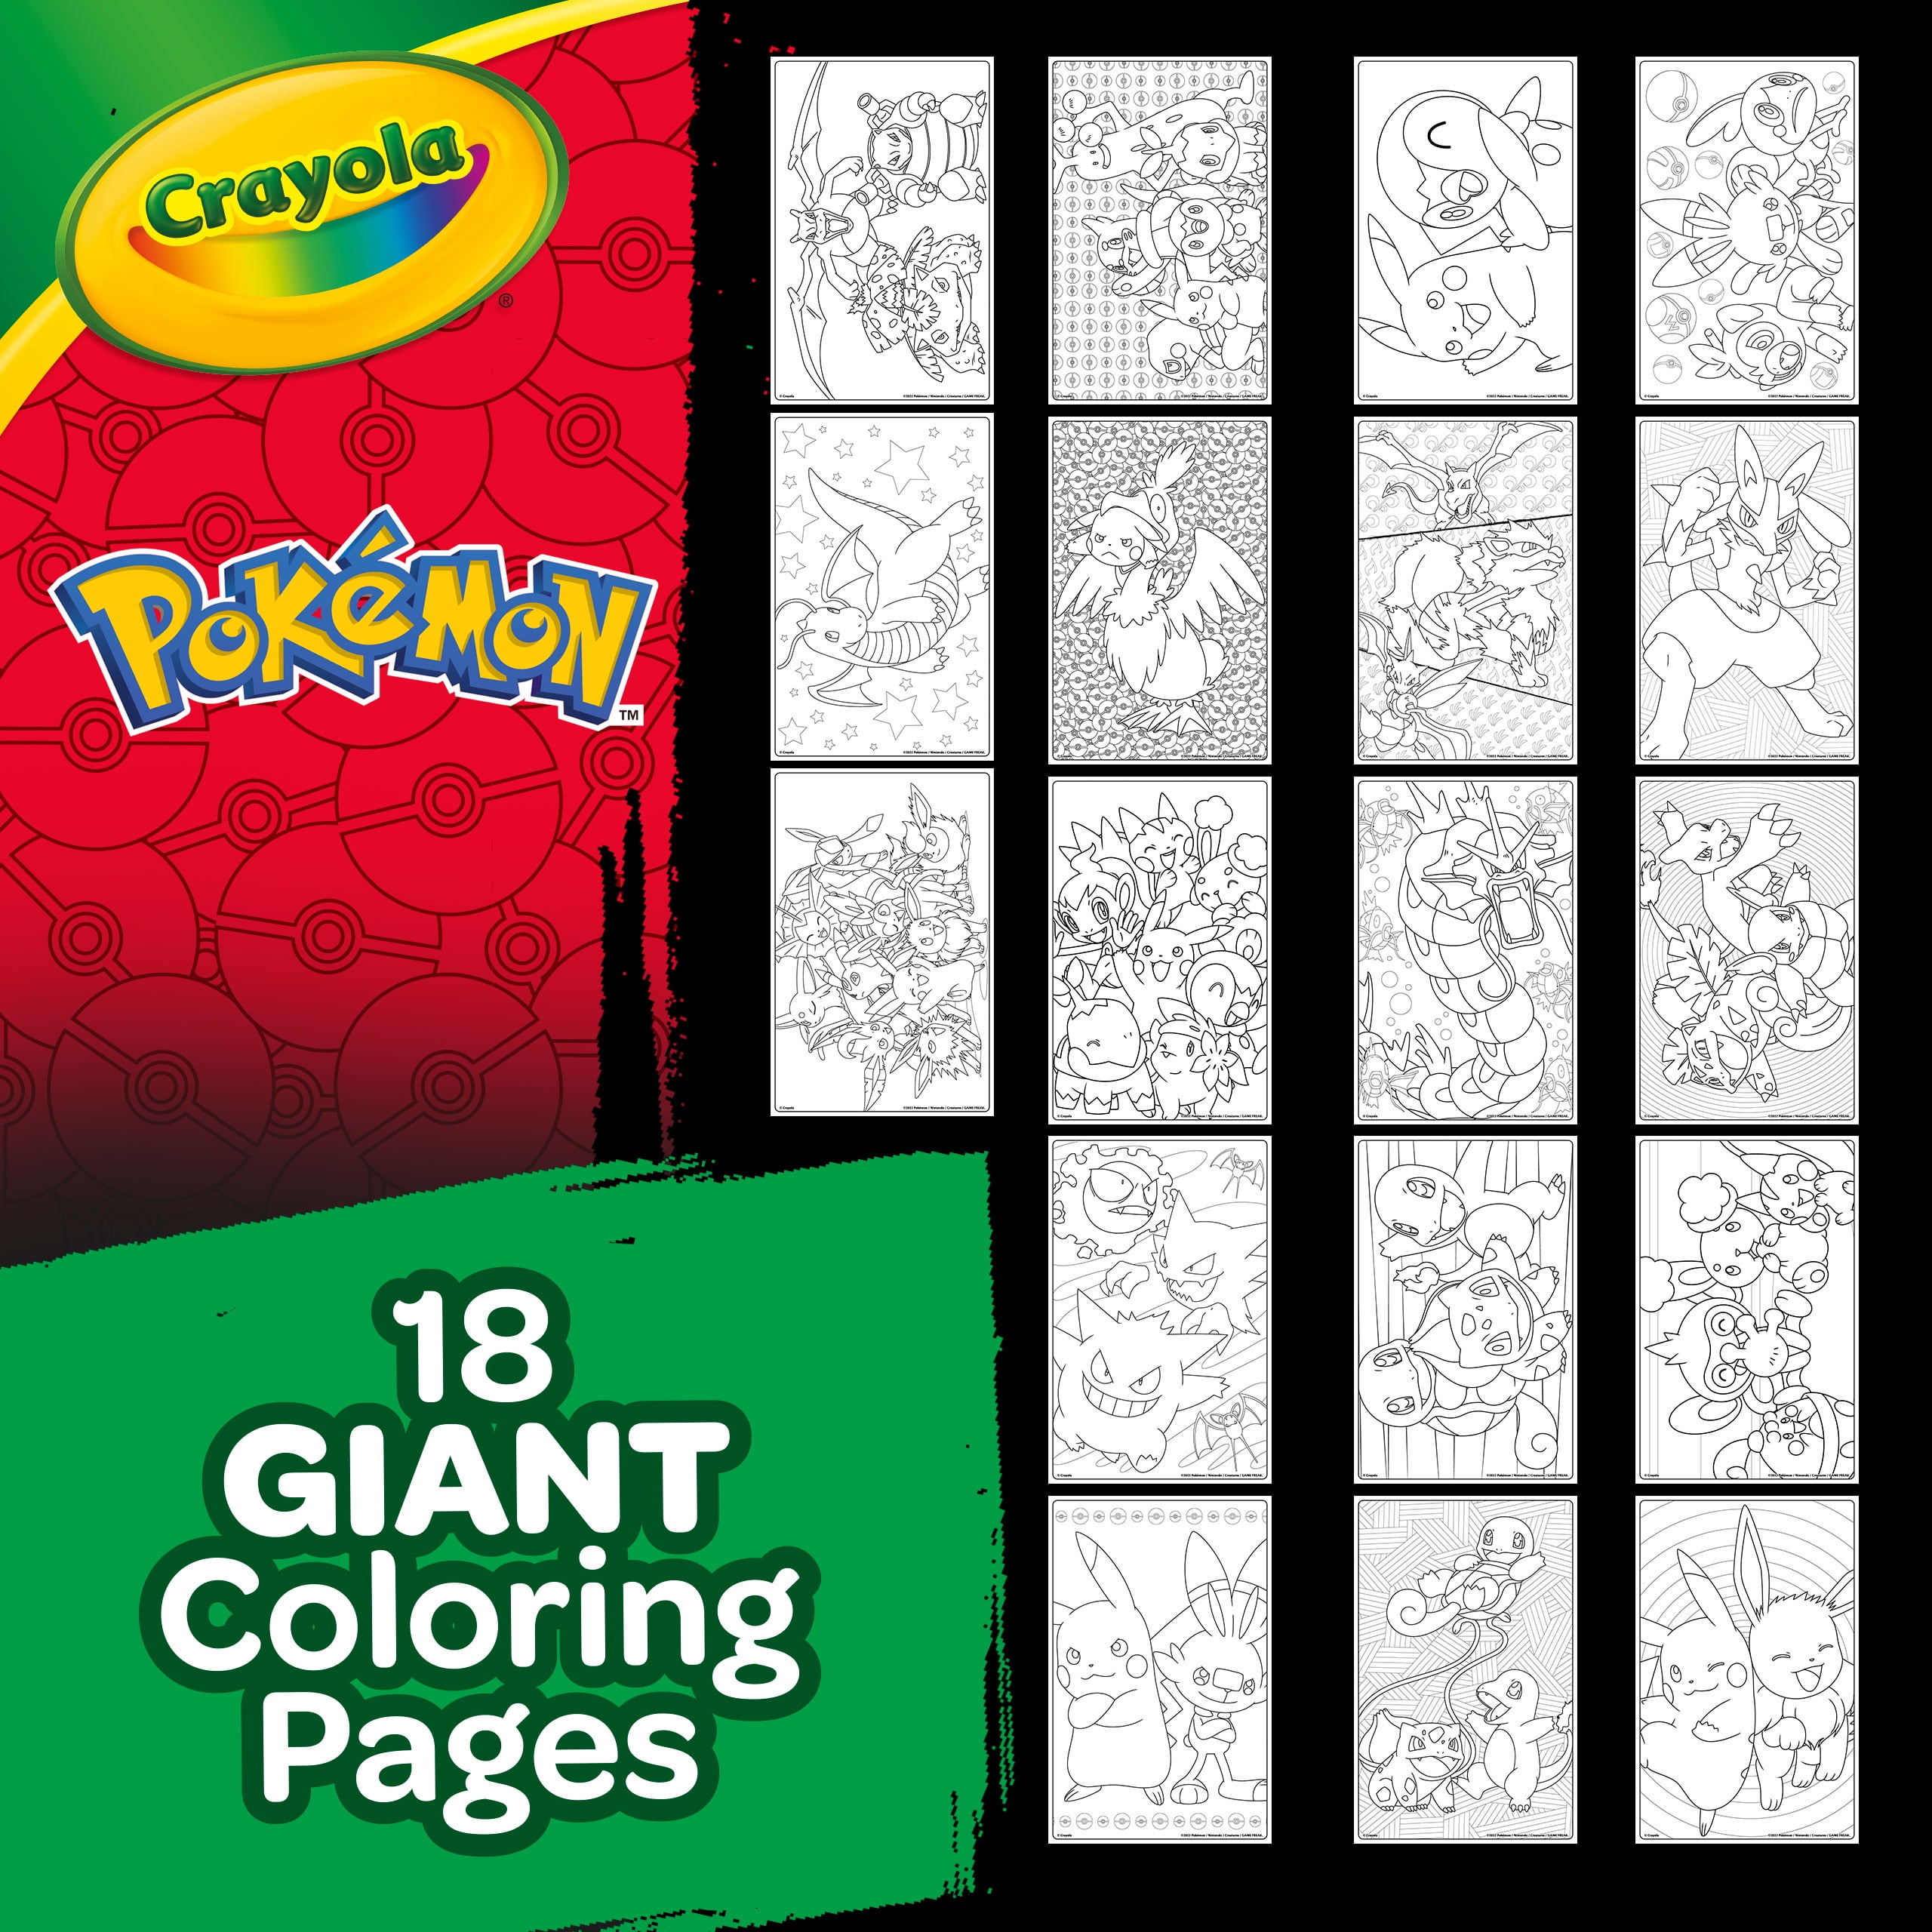 Coloring a Crayola Giant Pokemon page. 